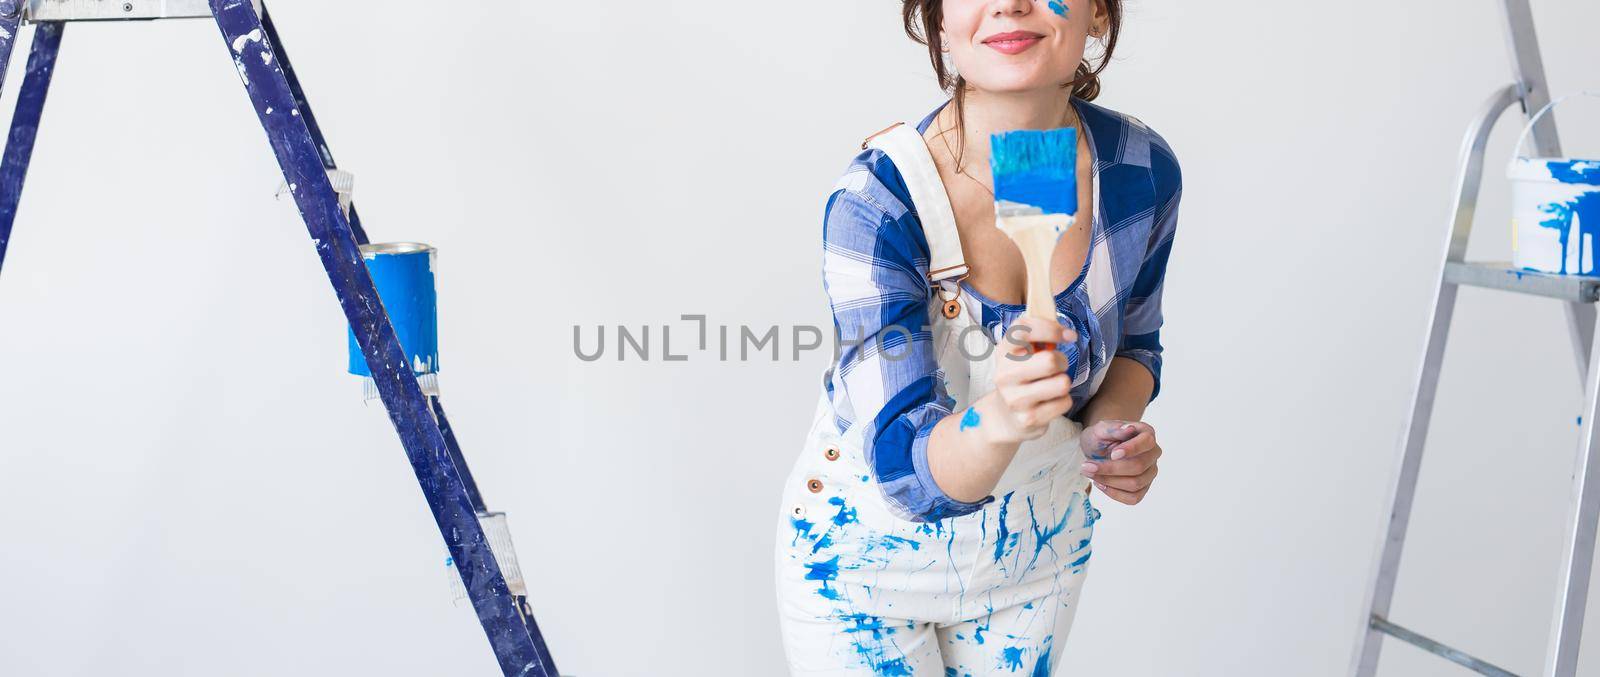 Repair, renovation and people concept - young woman painting the wall and looks like very happy, she with colorful cheek.